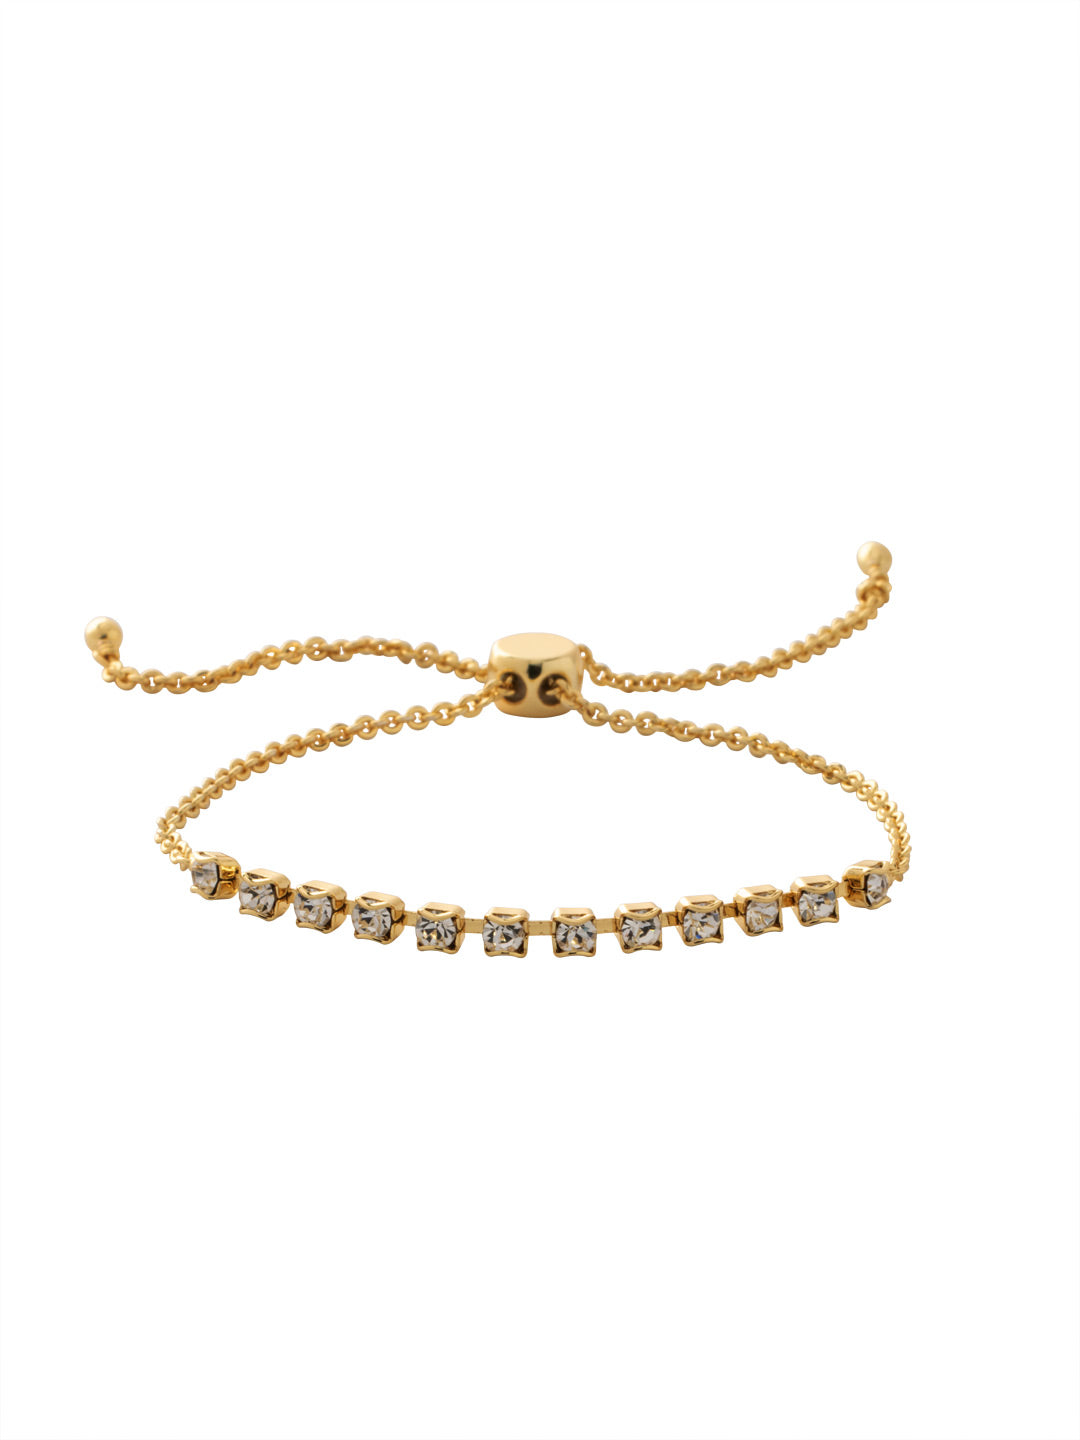 Crystal Embellished Slider Bracelet - BFM43BGCRY - <p>The Crystal Embellished Slider Bracelet features a half rhinestone chain on an adjustable slider. From Sorrelli's Crystal collection in our Bright Gold-tone finish.</p>